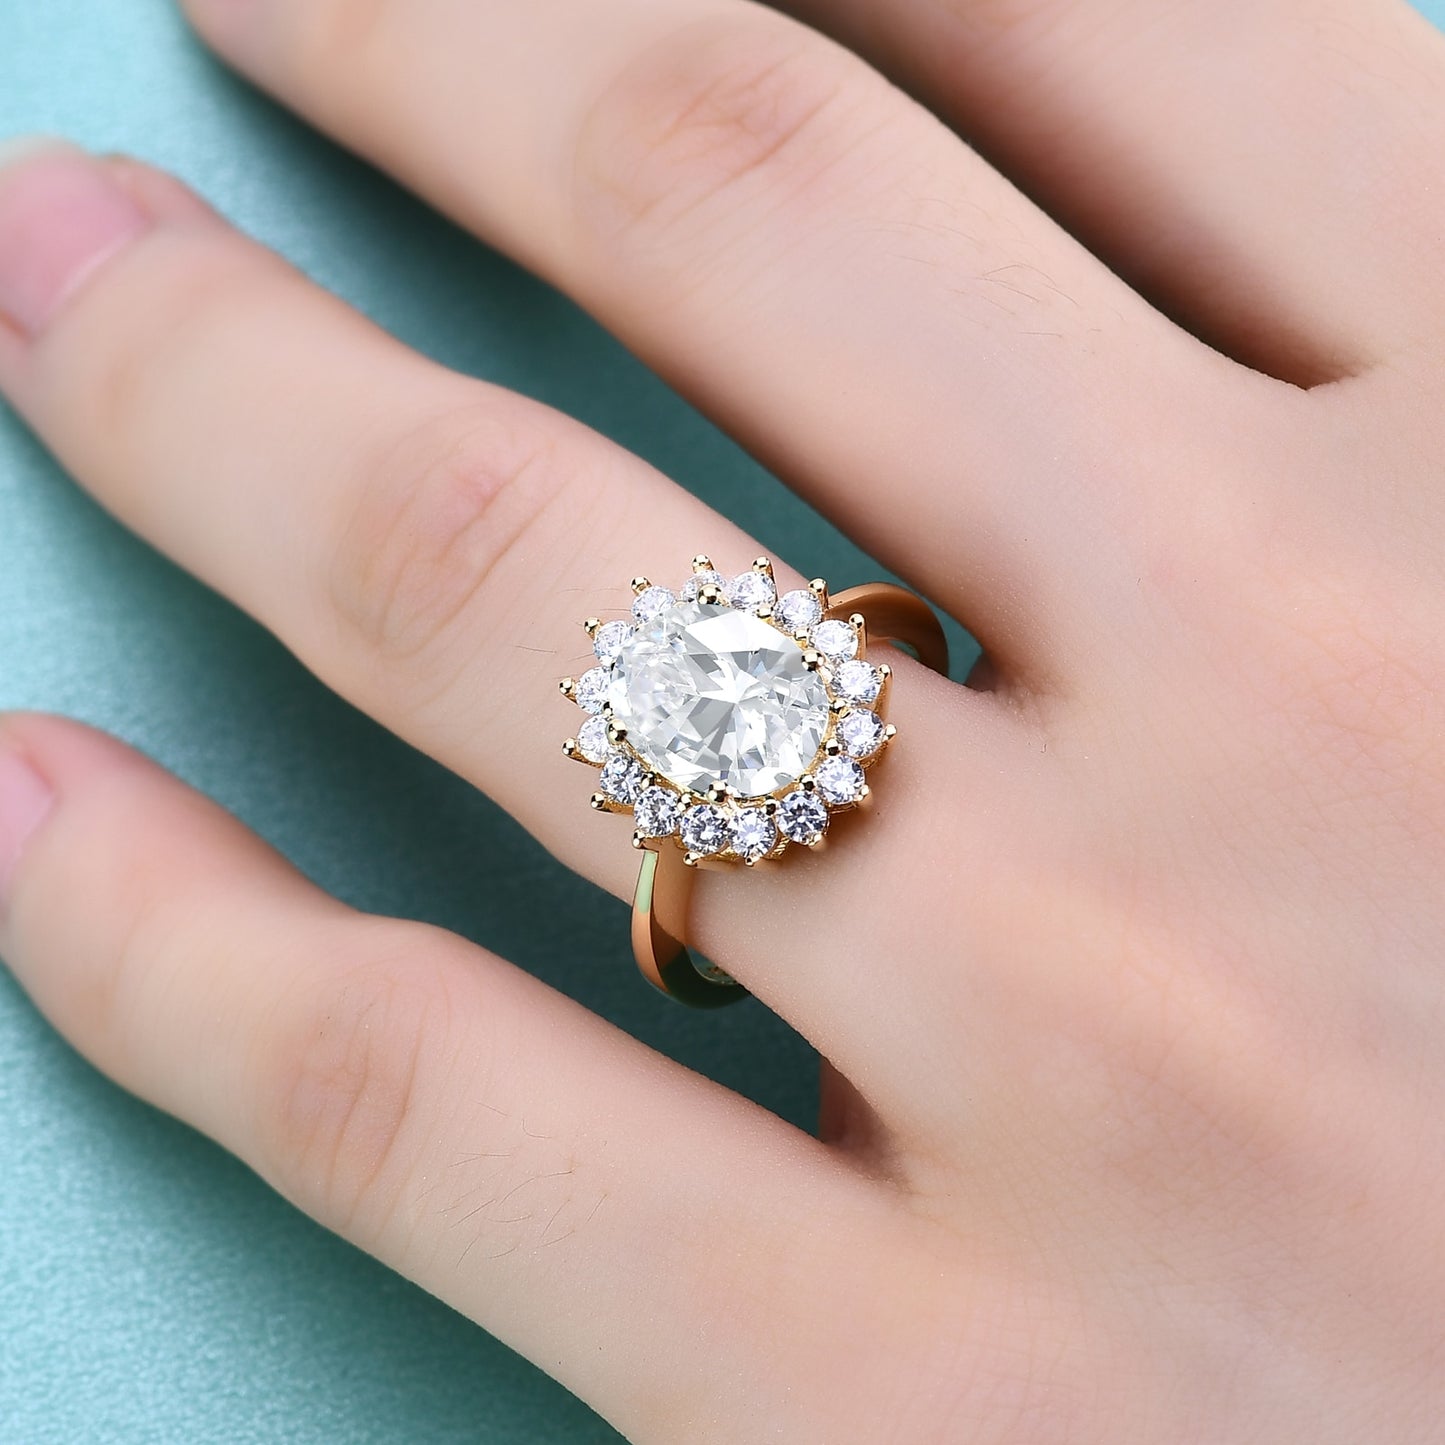 A gold halo ring set with a 3CT oval cut moissanite set in the middle of a ring of clear gems, worn on a ring finger.